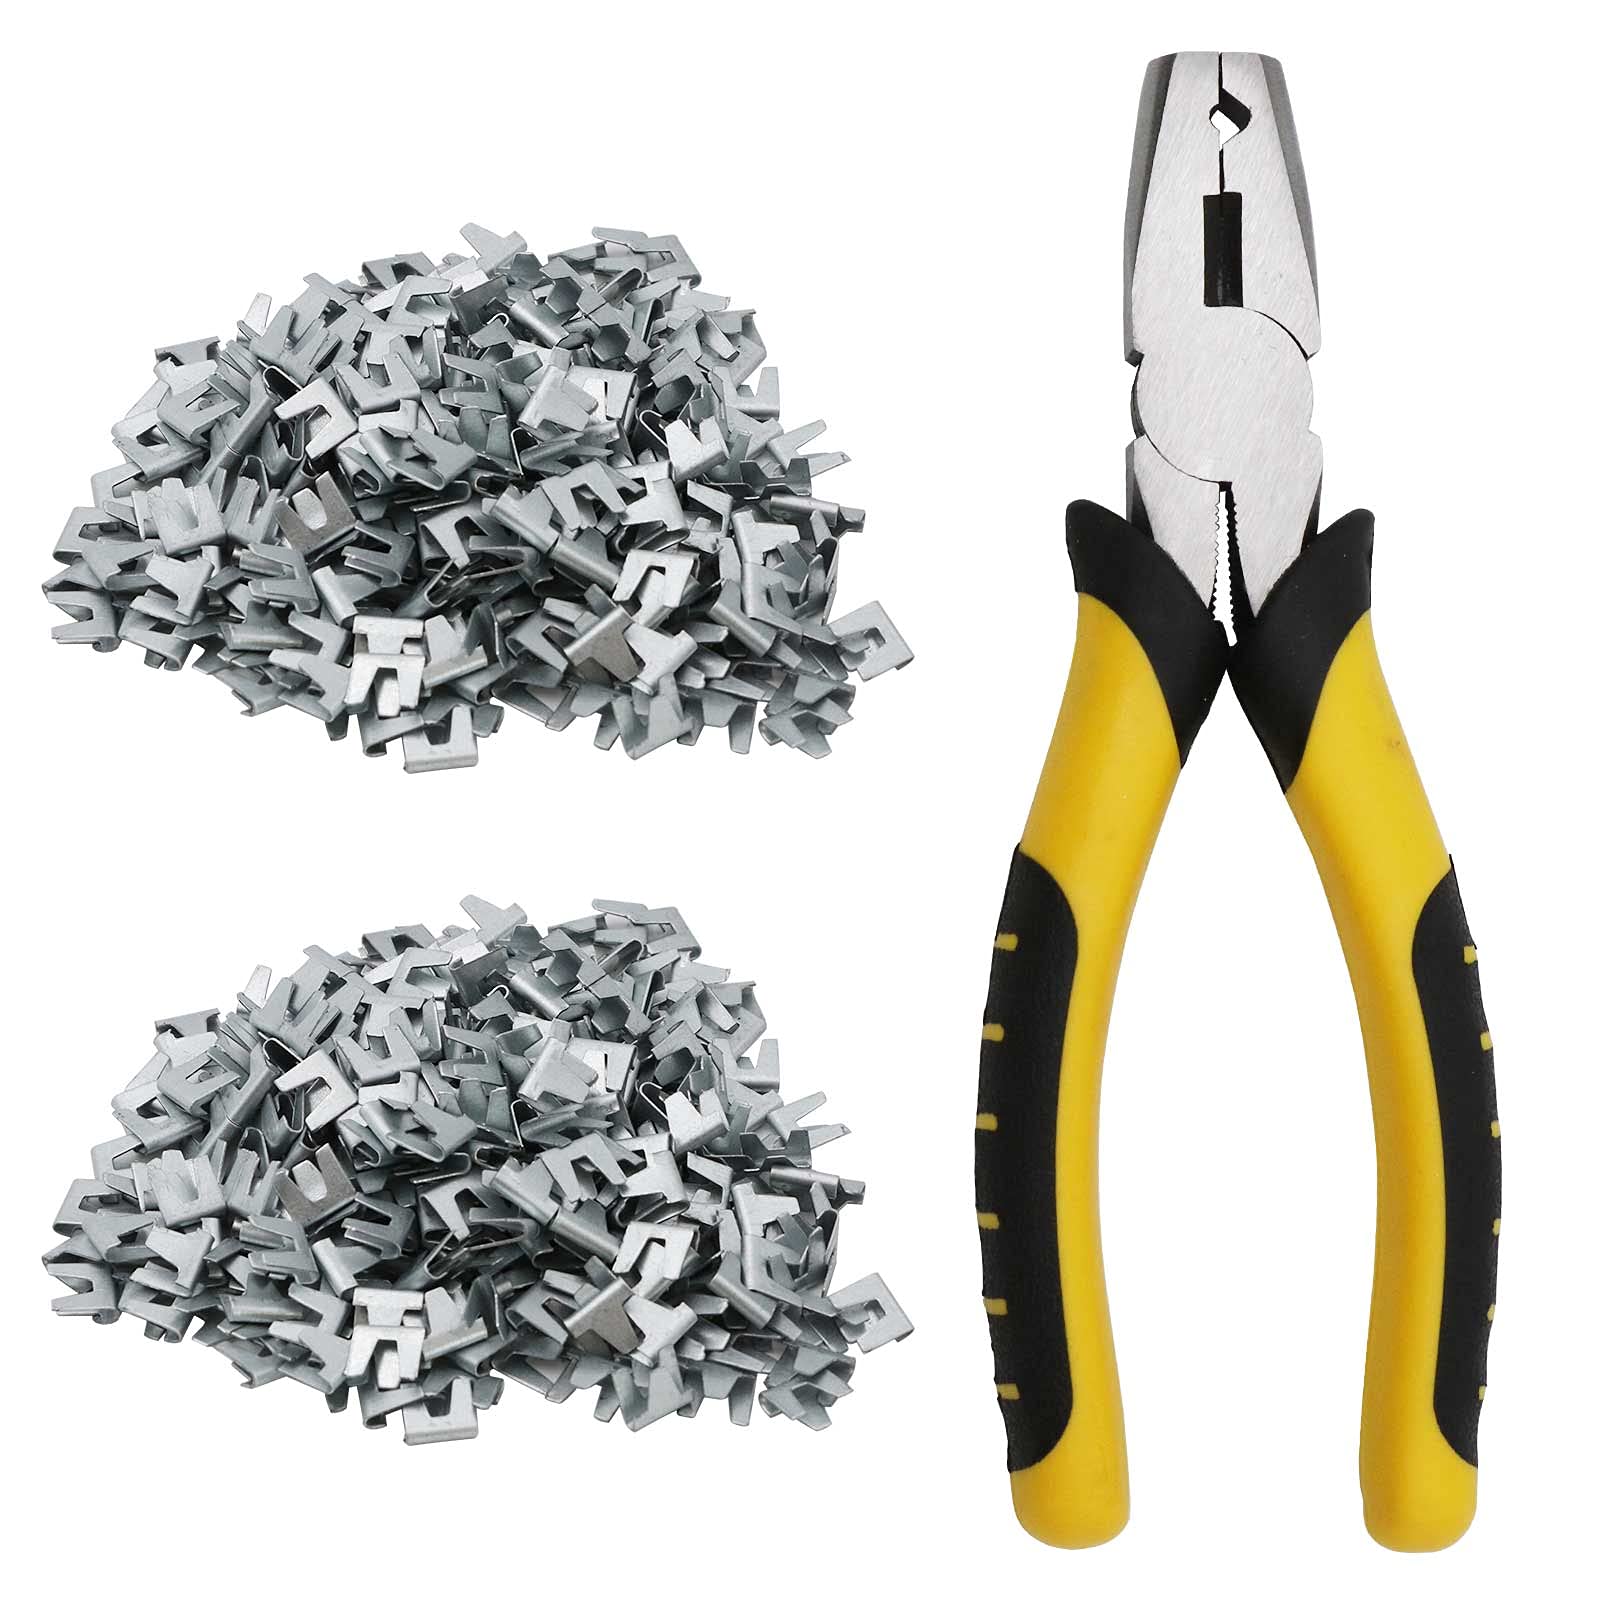 nomal Wire Cage Buckle Pliers with 600 Wire Cage Clips Wire Cage Fasten Clips Buckle Pliers Pet Cage Building installation Clips Tools